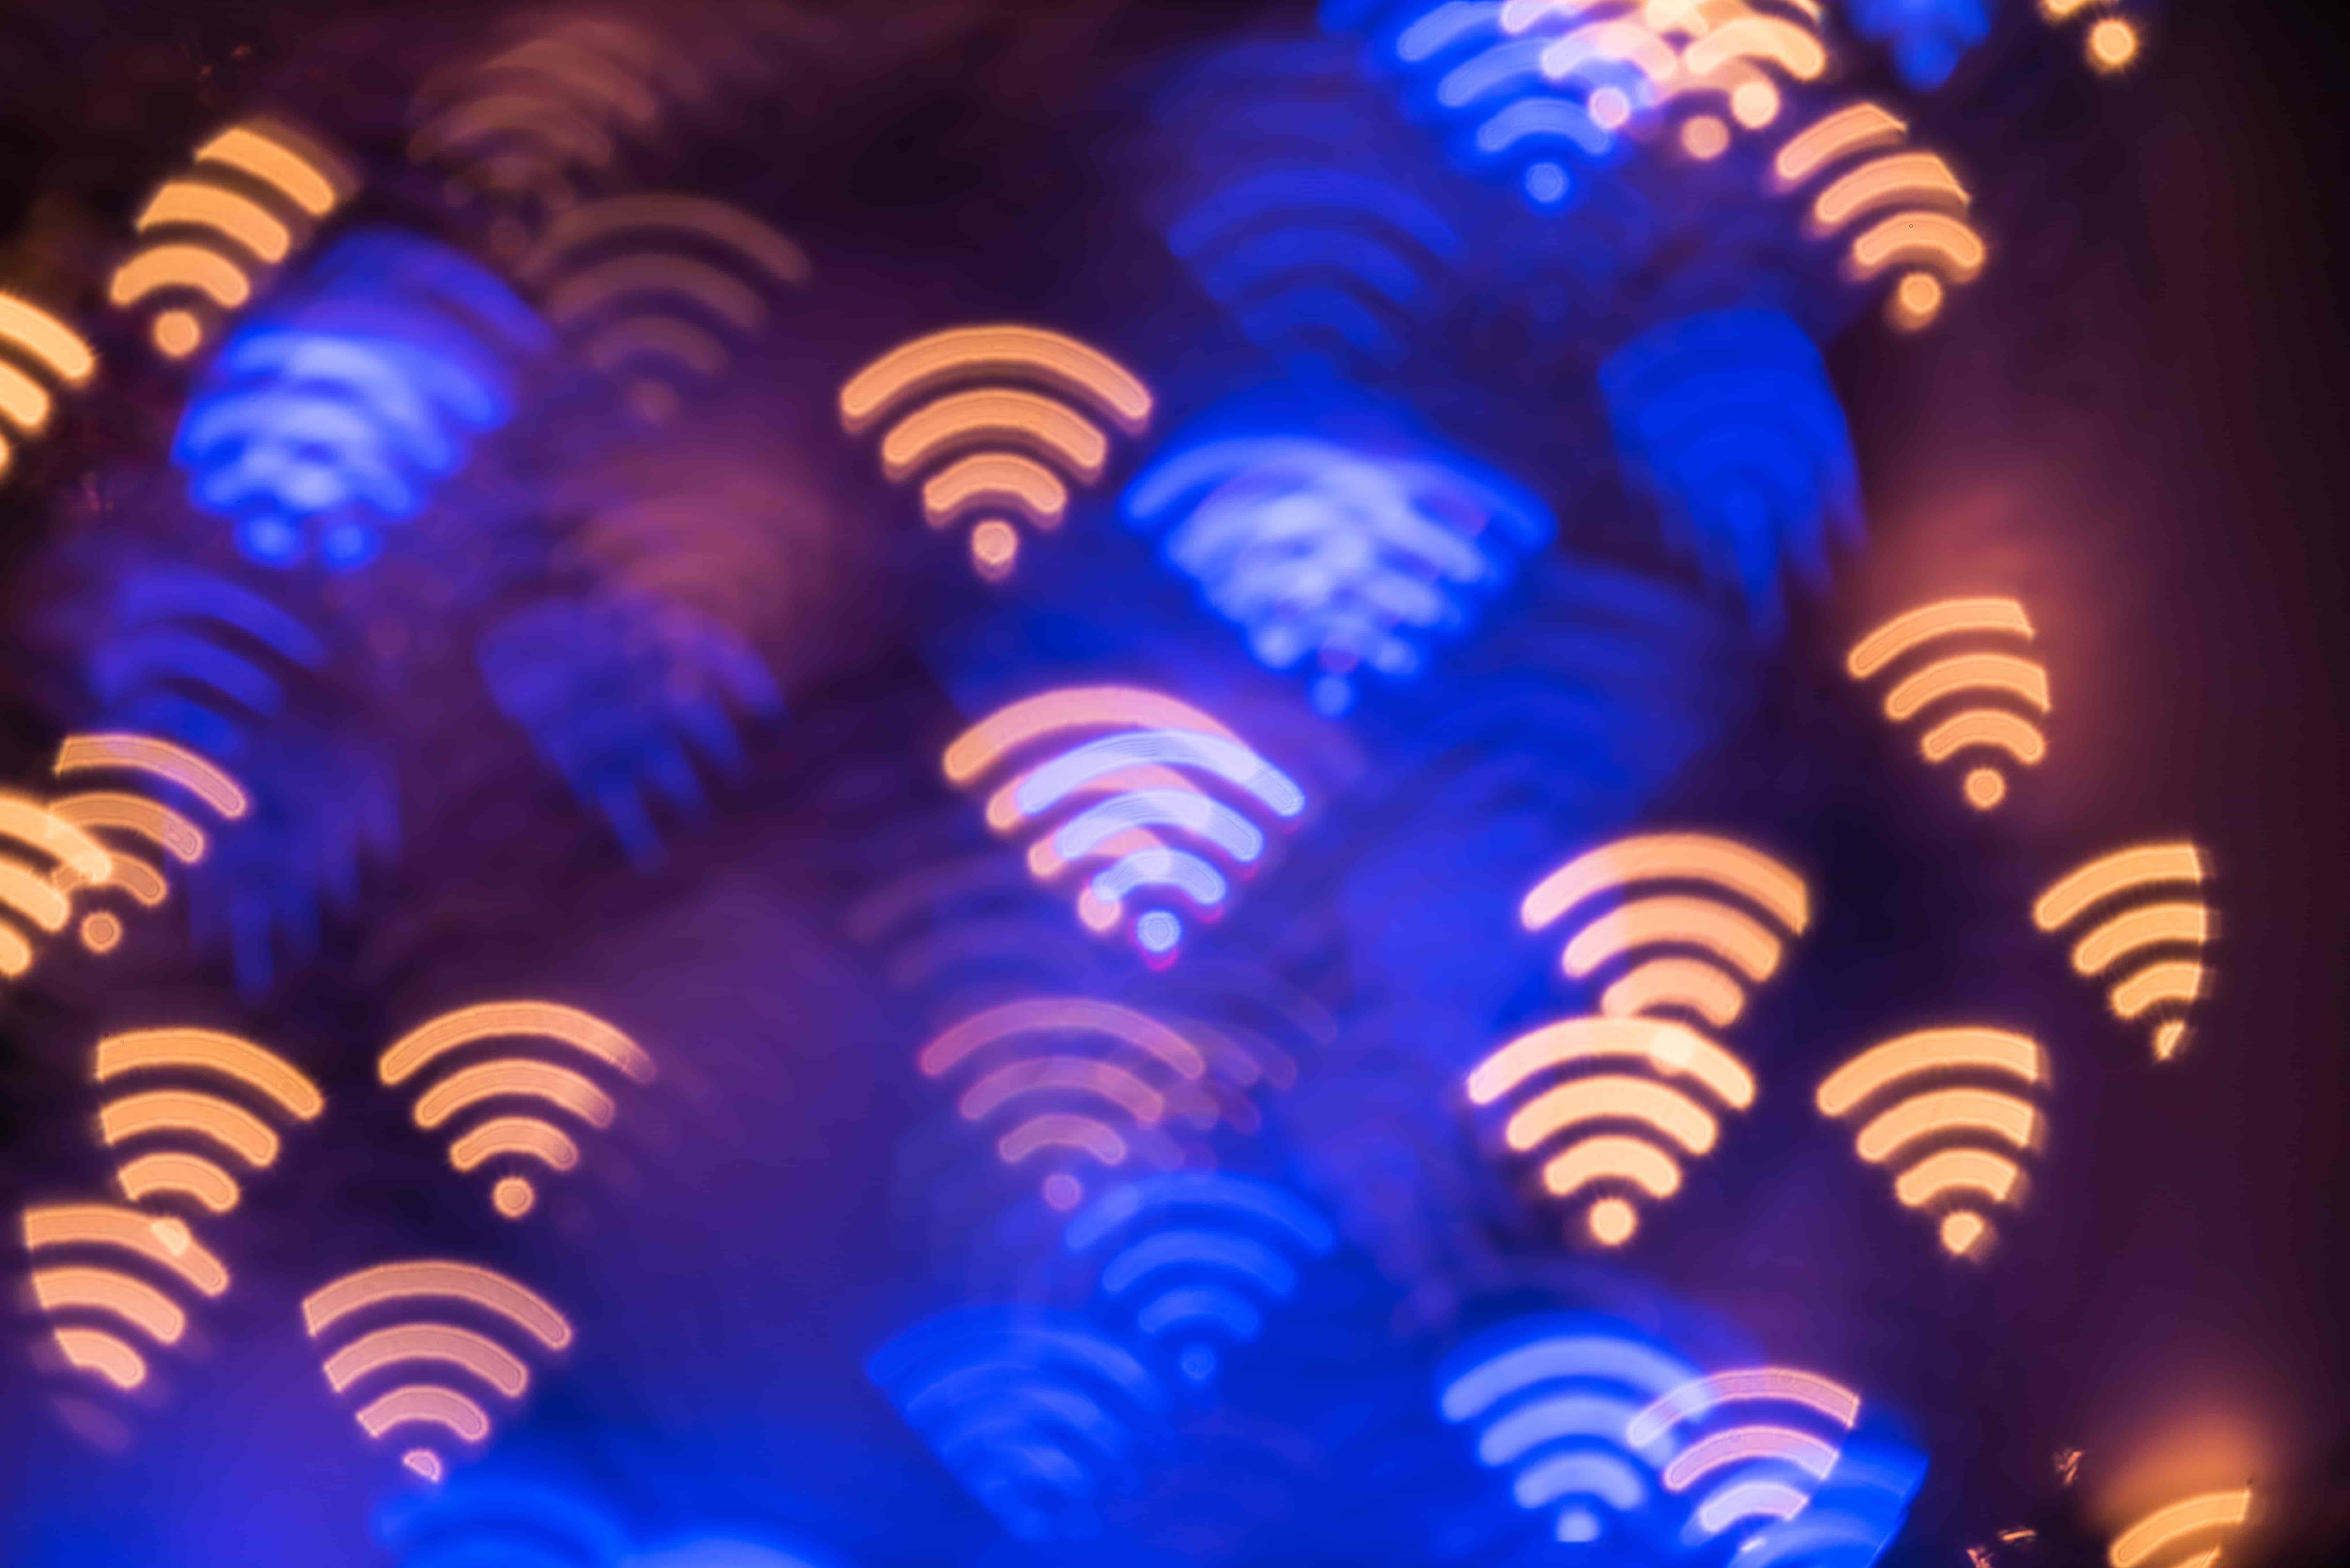 The History of Public Wi-Fi and Why it has Become a Problem